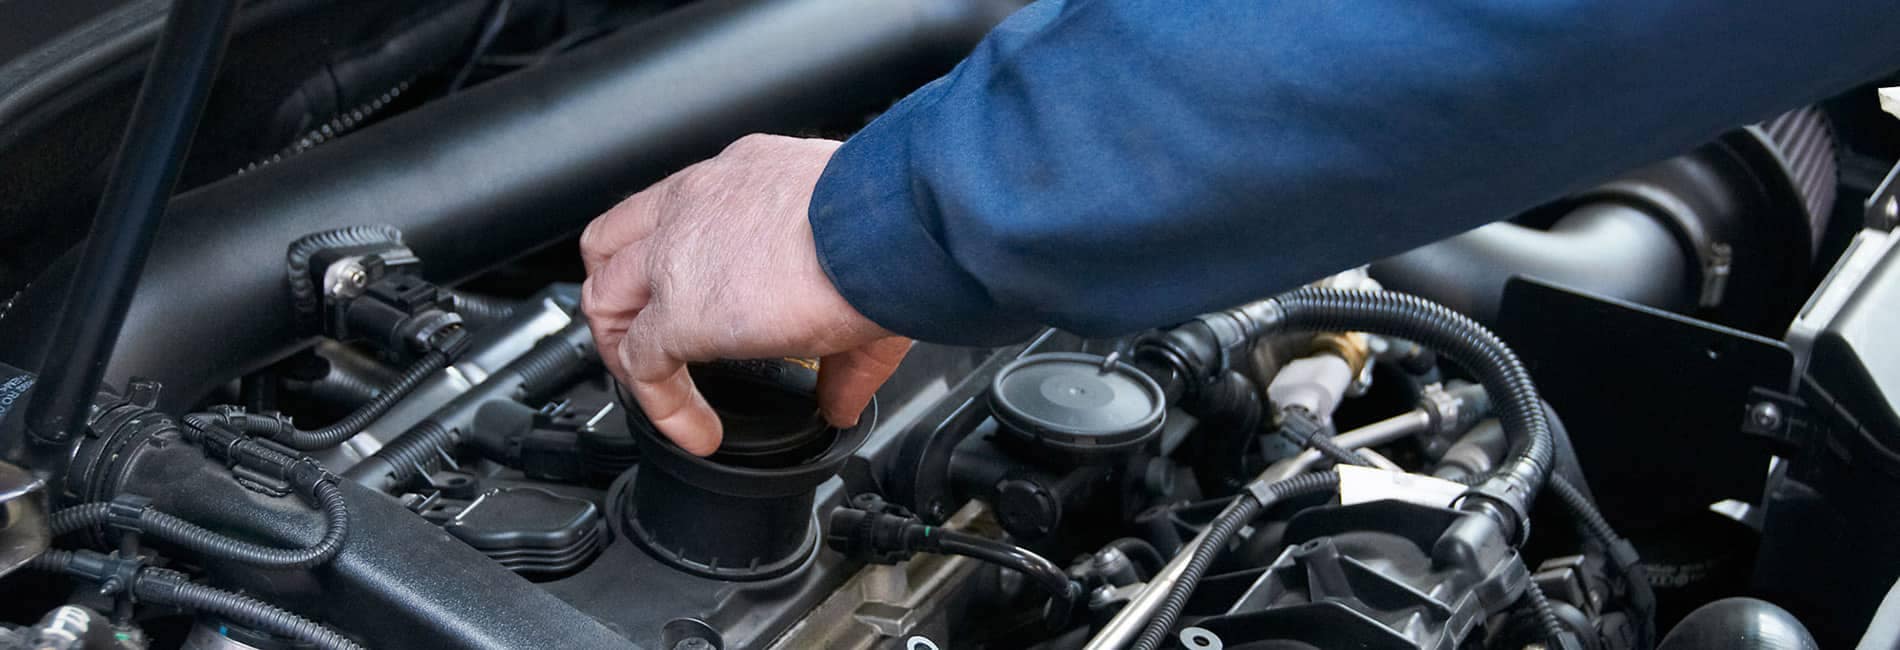 Close up image of a service technician checking the fluid levels of a car engine